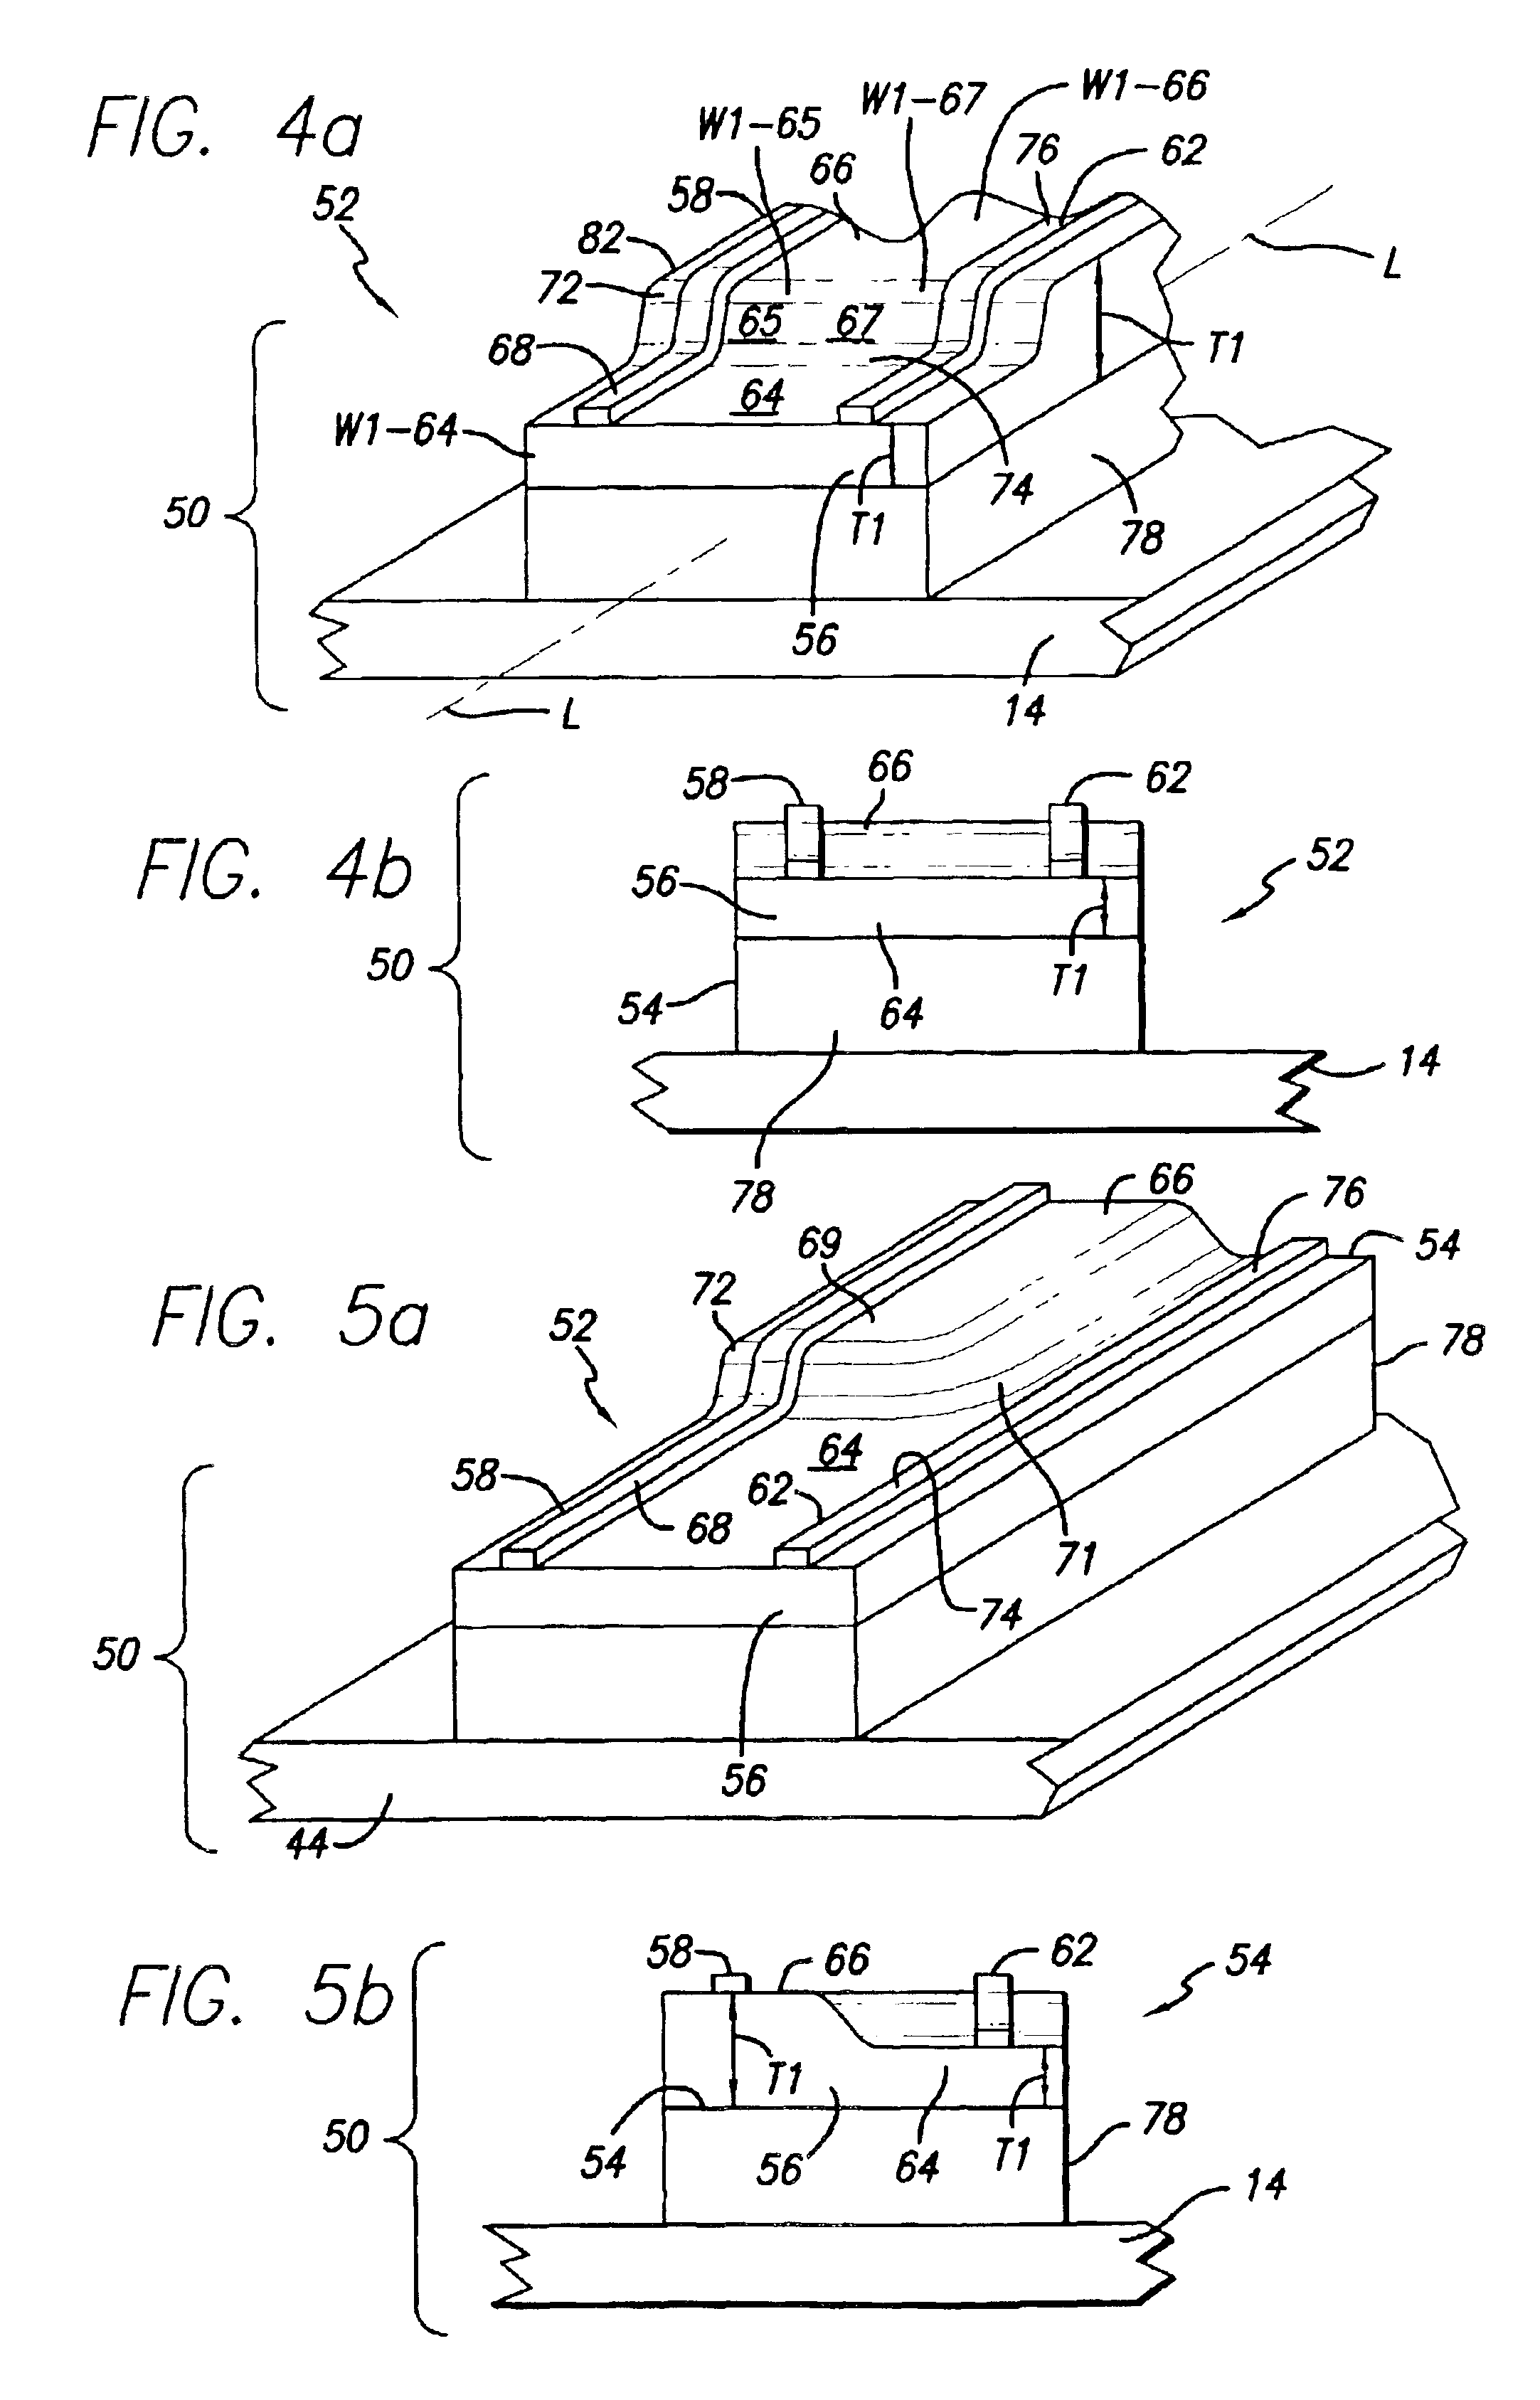 Trace flexure suspension with differential insulator and trace structures for locally tailoring impedance